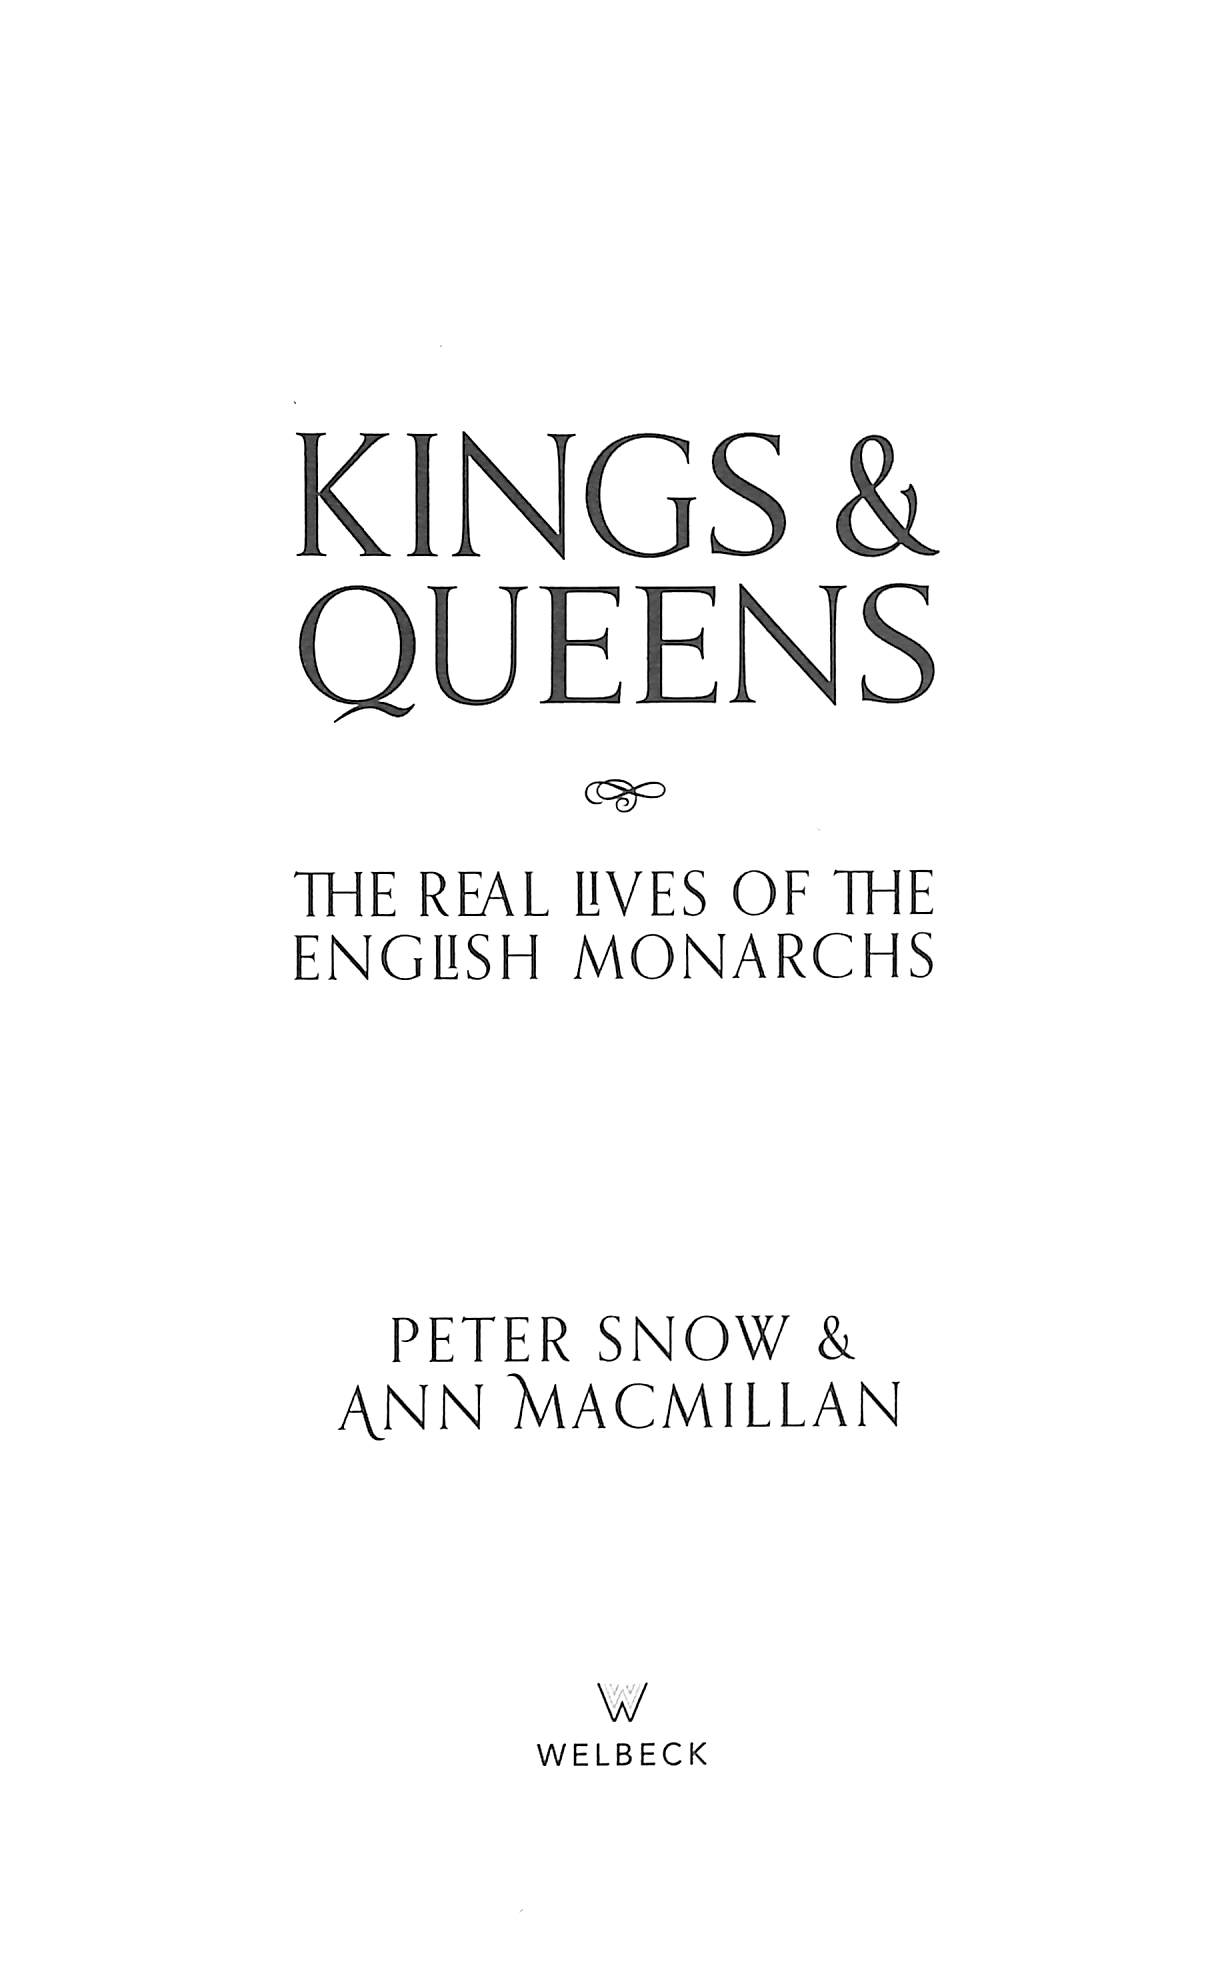 Kings & Queens: The Real Lives of the English Monarchs by Ann